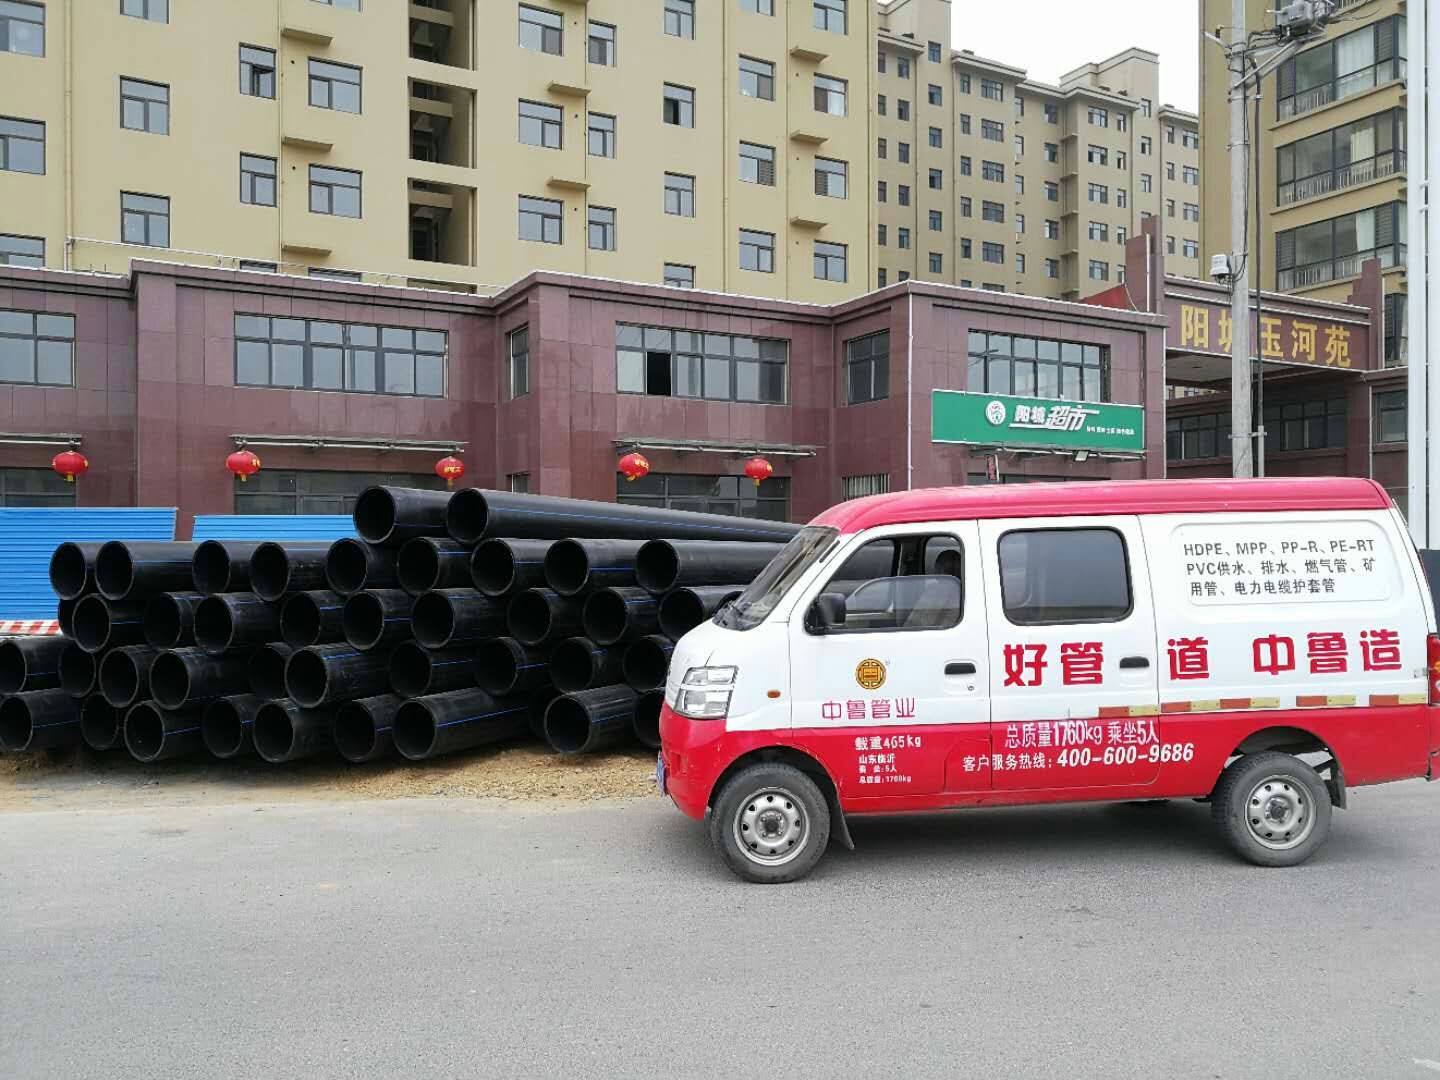 Site construction site in Jining